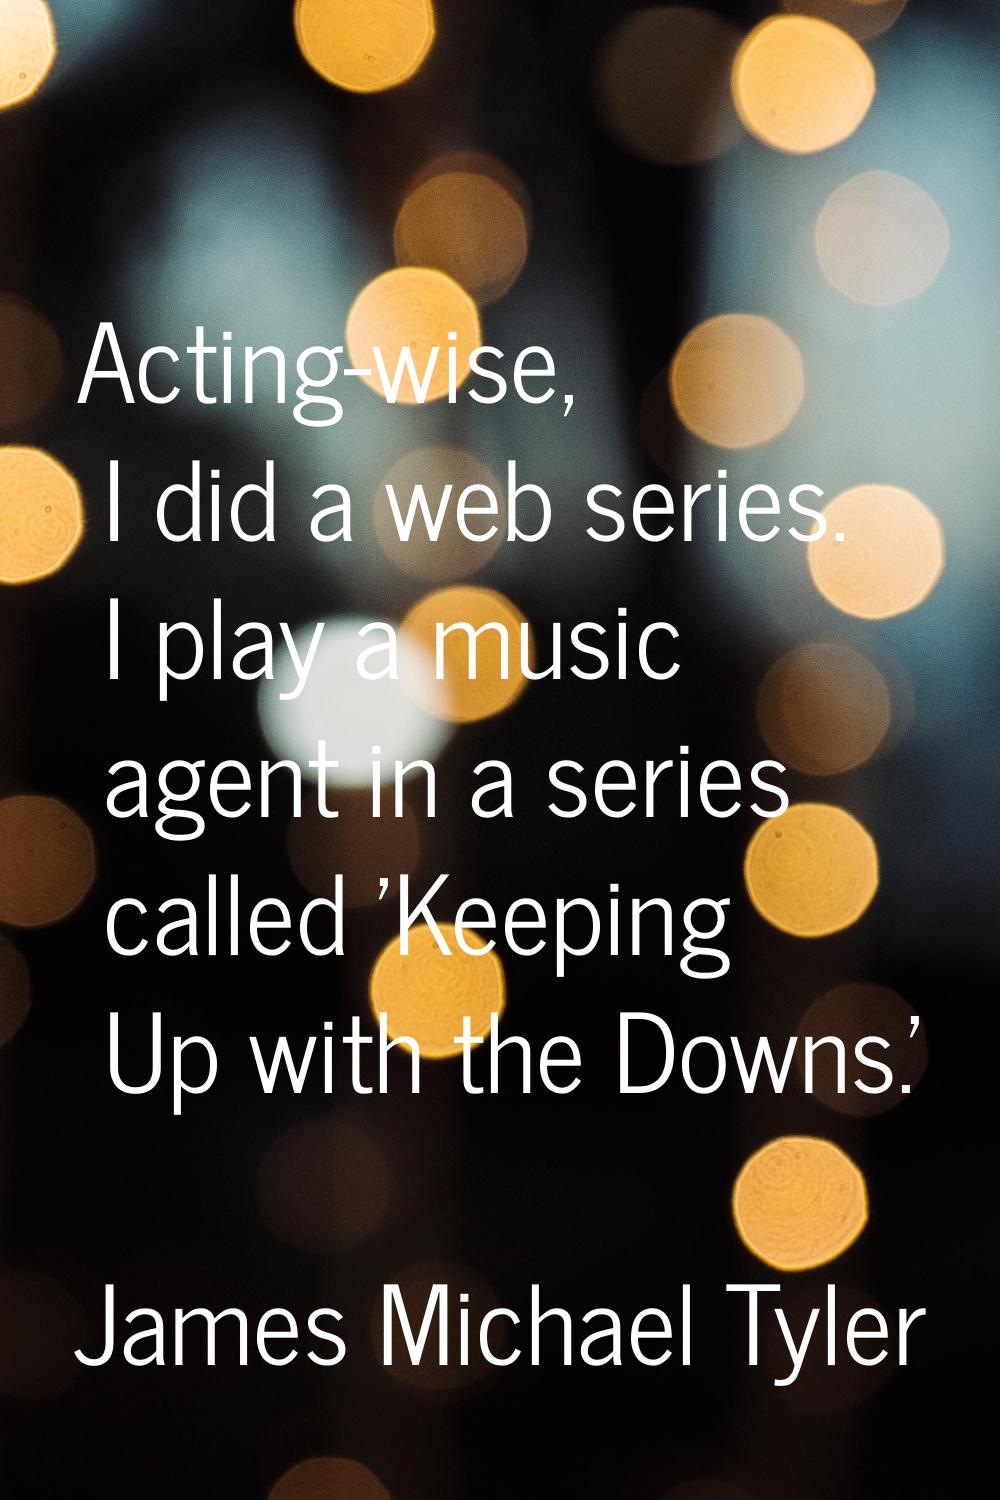 Acting-wise, I did a web series. I play a music agent in a series called 'Keeping Up with the Downs